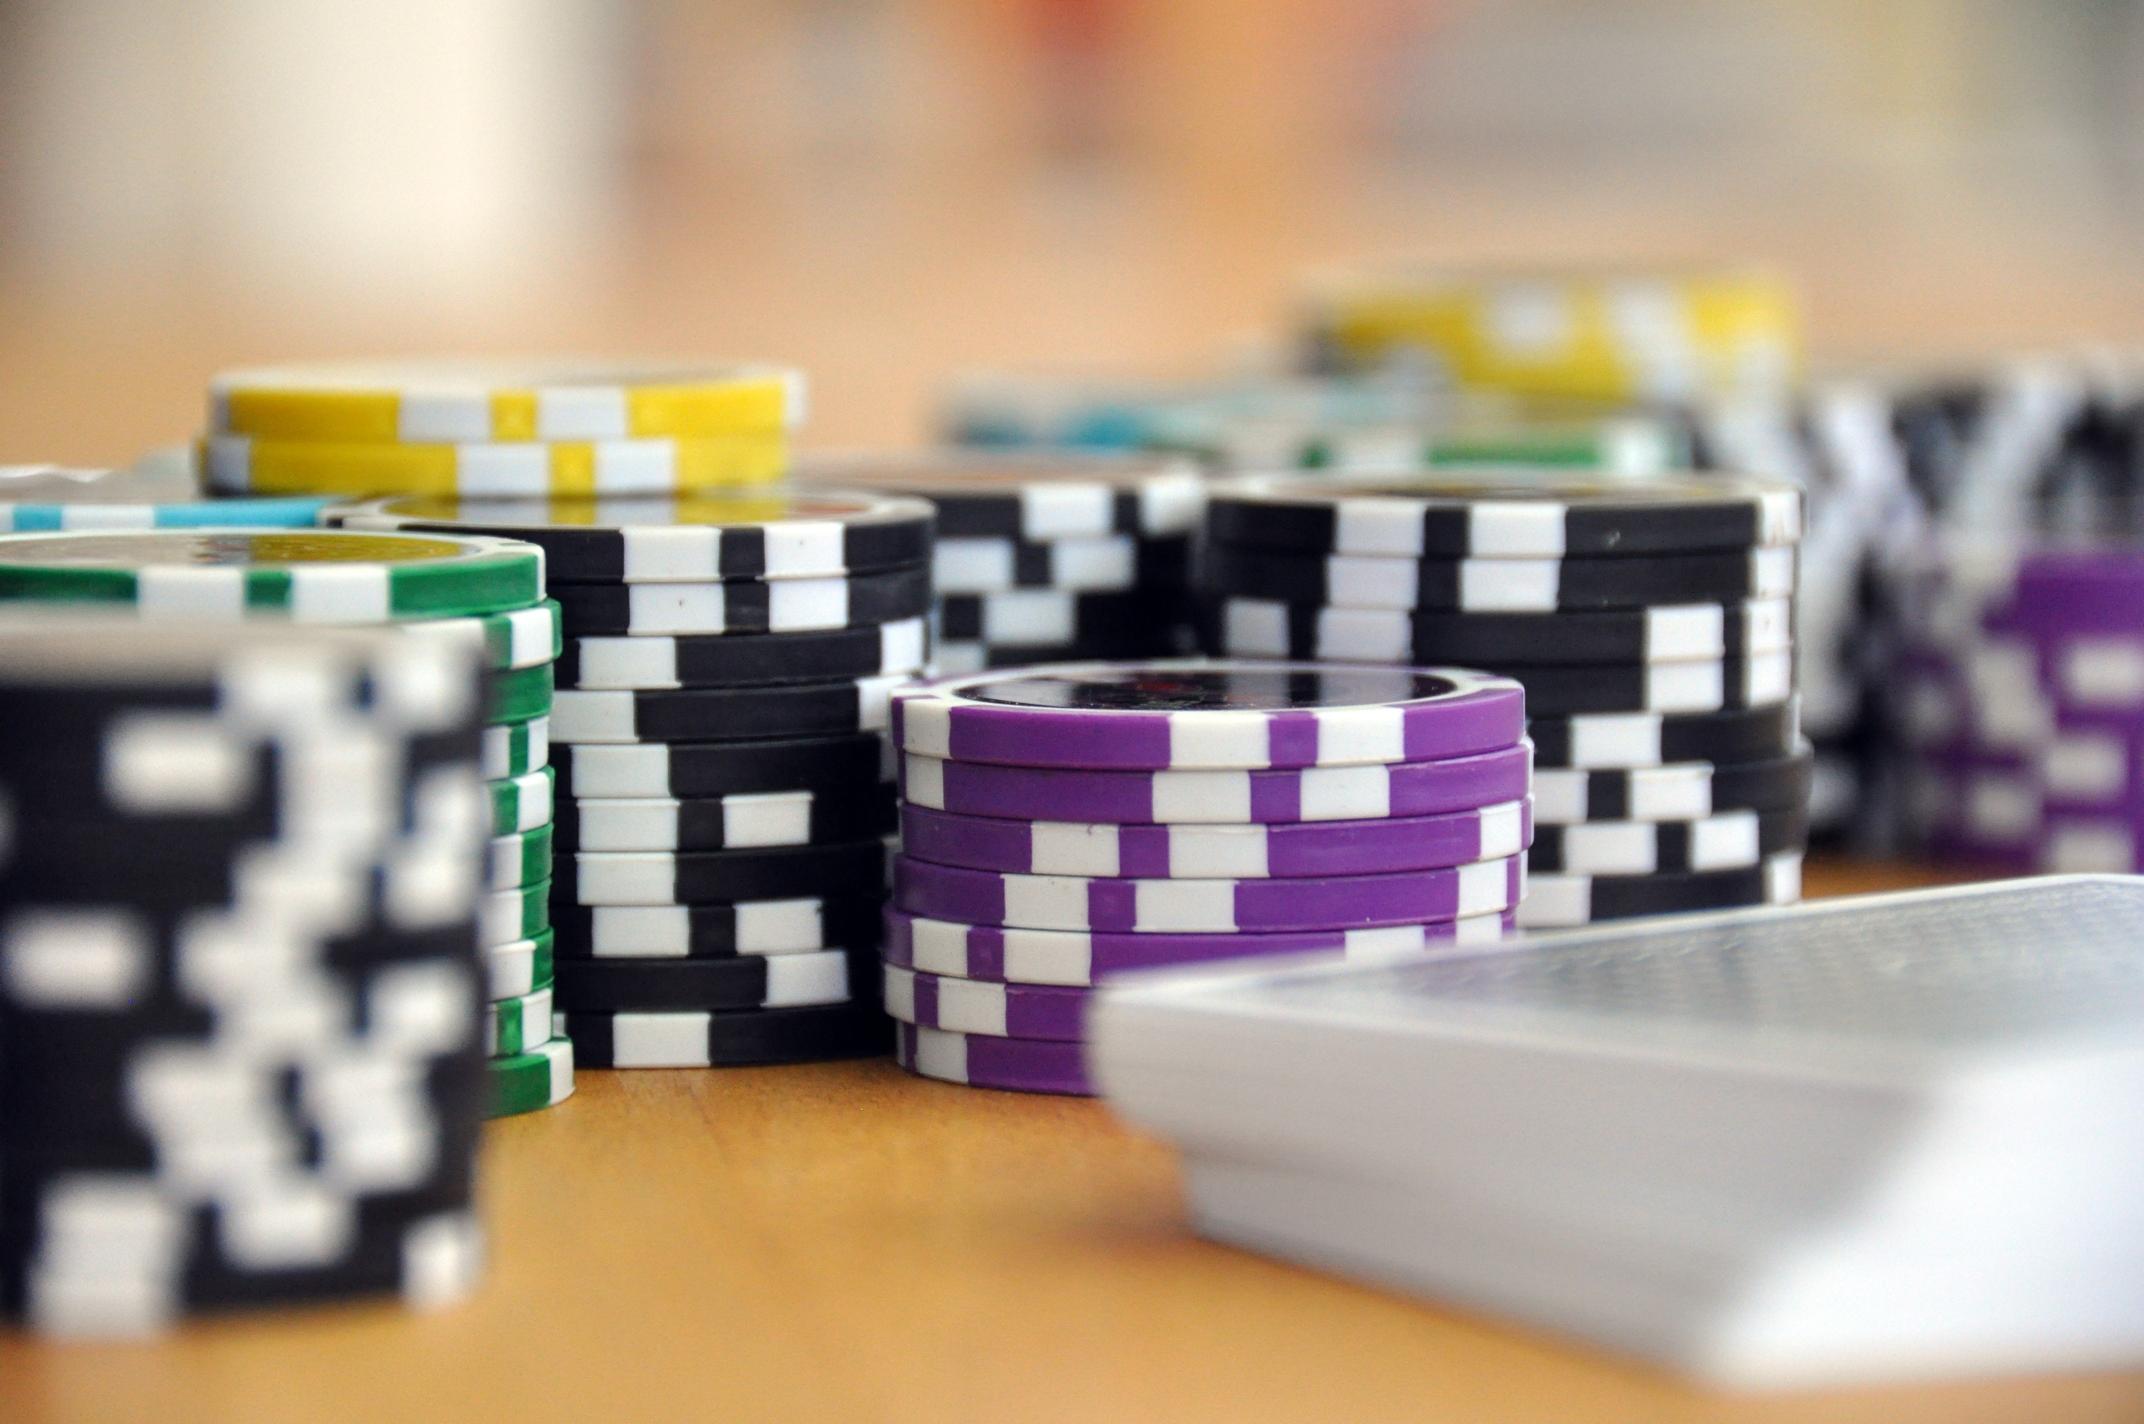 Who are the top 10 most successful roulette players in history?